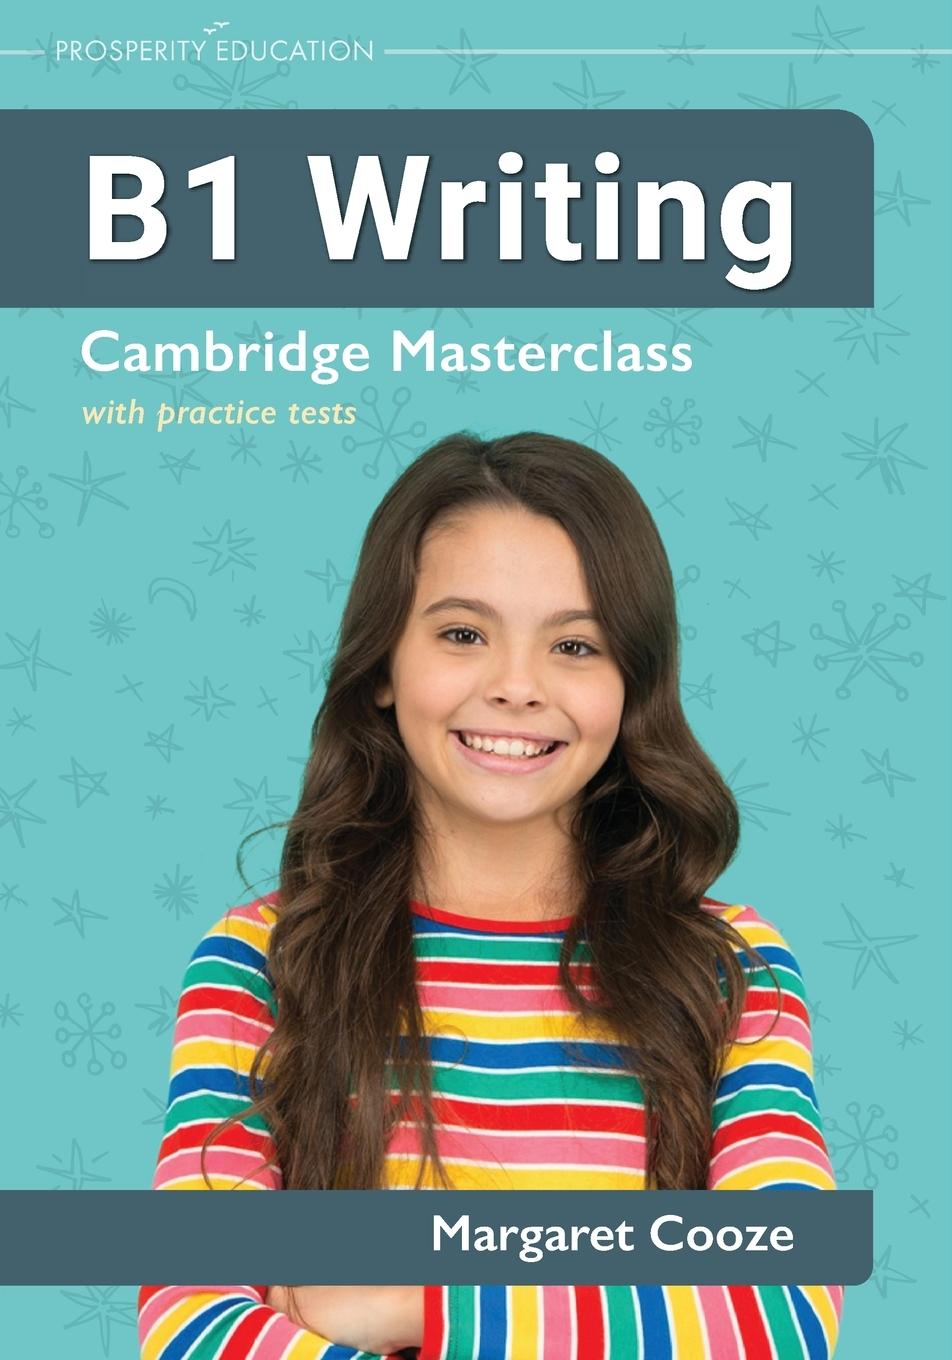 Book B1 Writing | Cambridge Masterclass with practice tests 